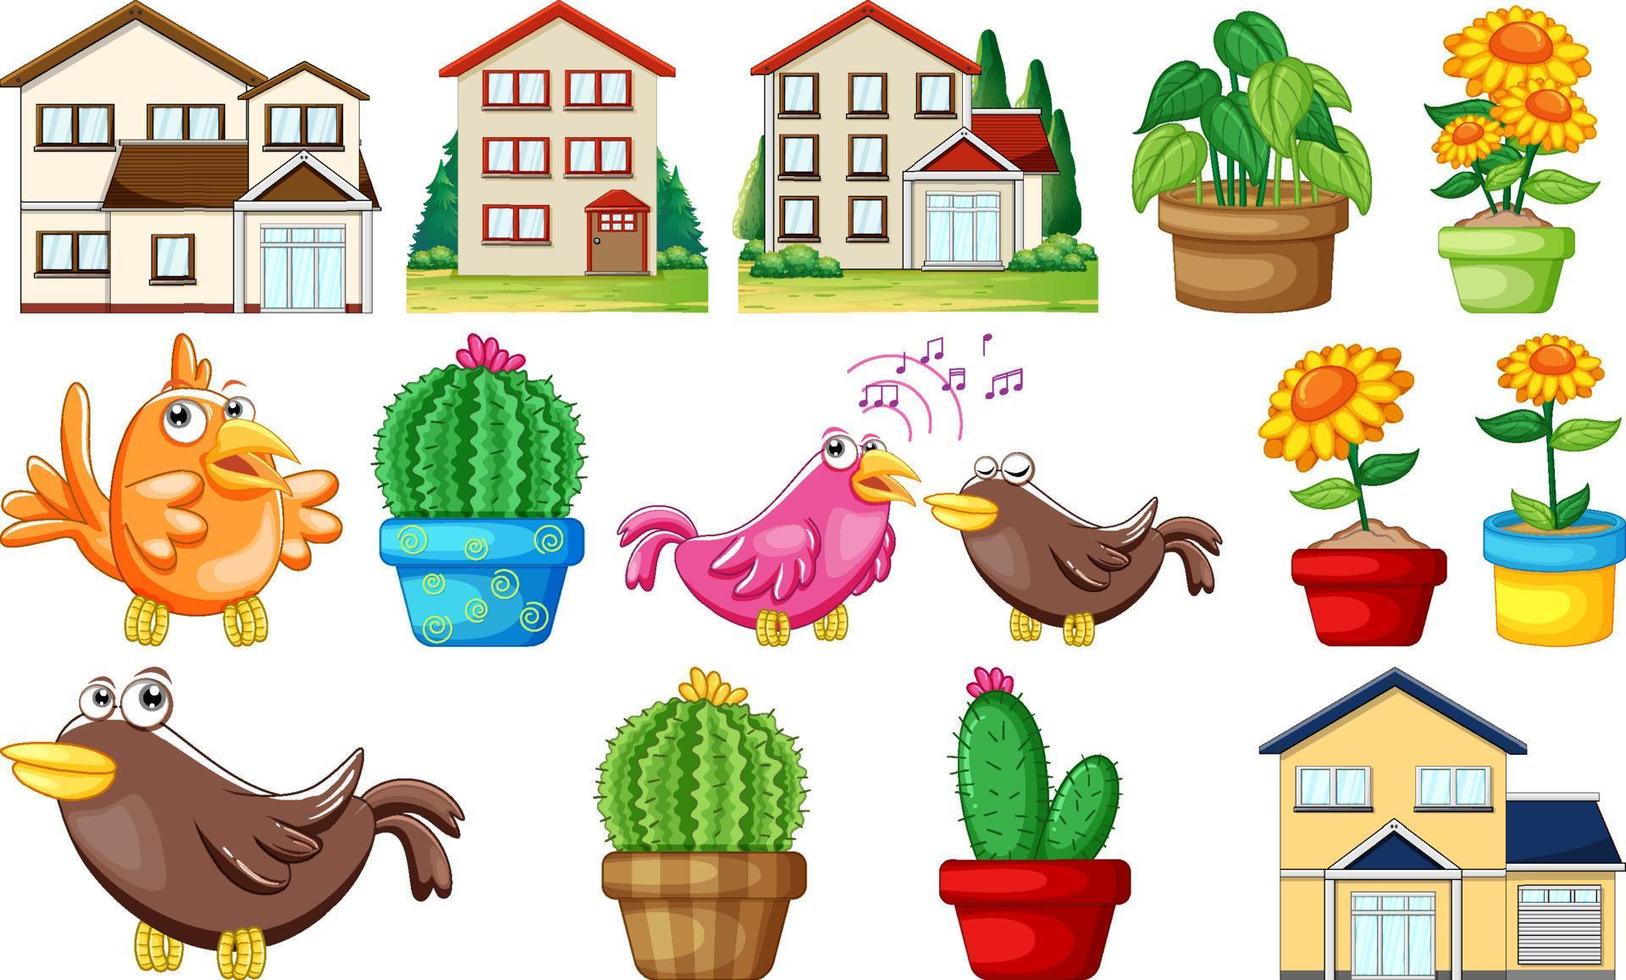 Different house designs and cute birds vector